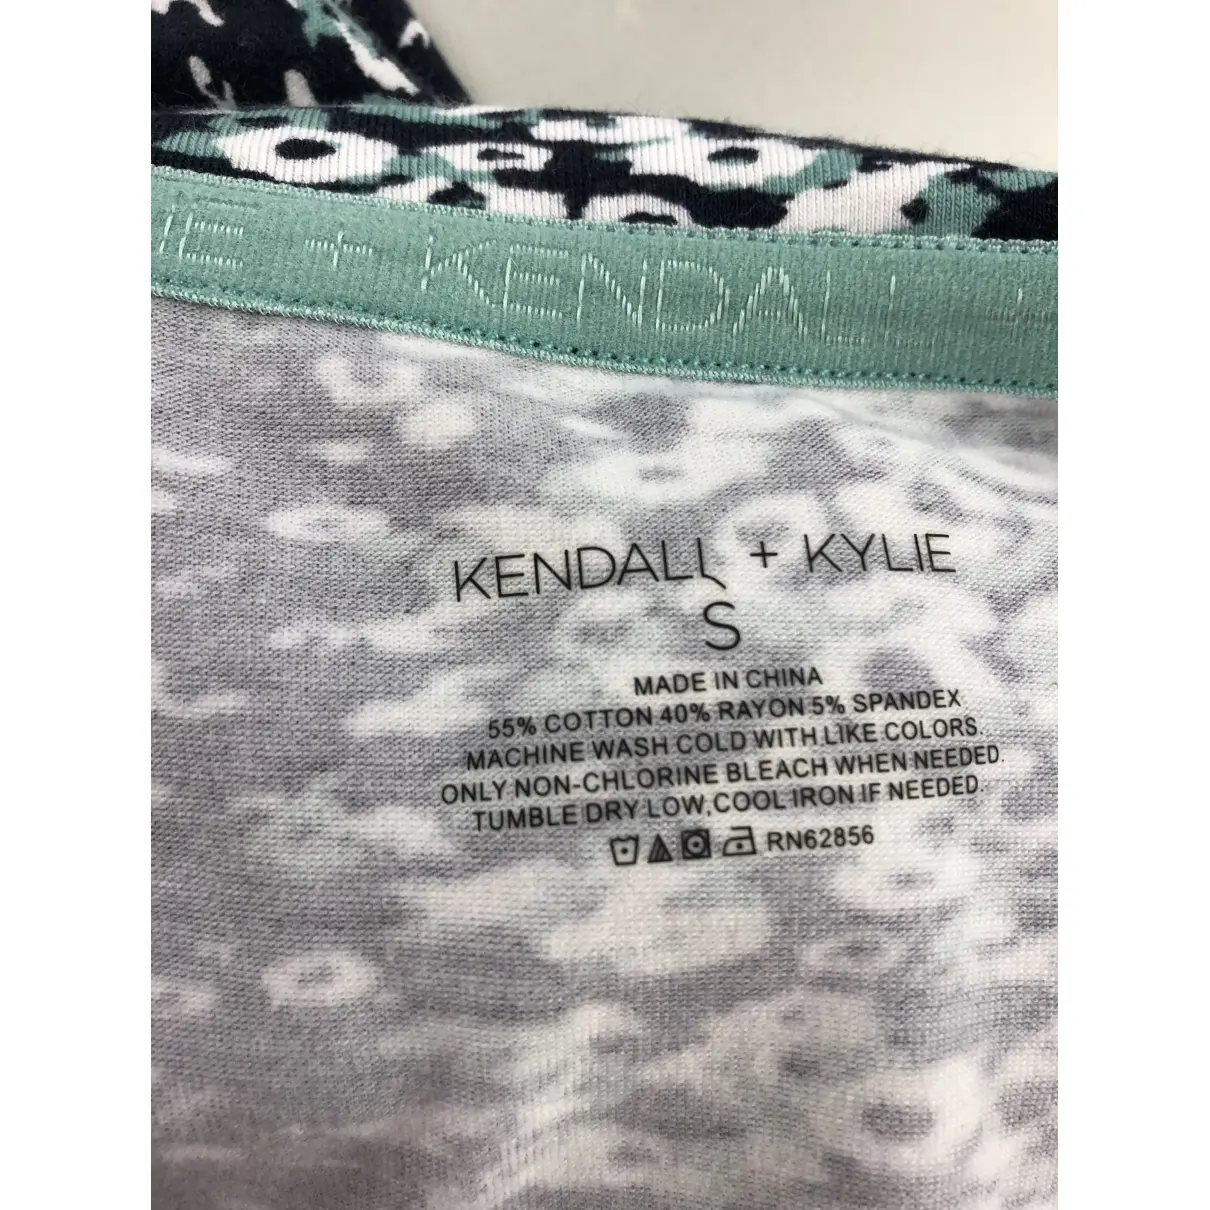 Buy Kendall + Kylie T-shirt online